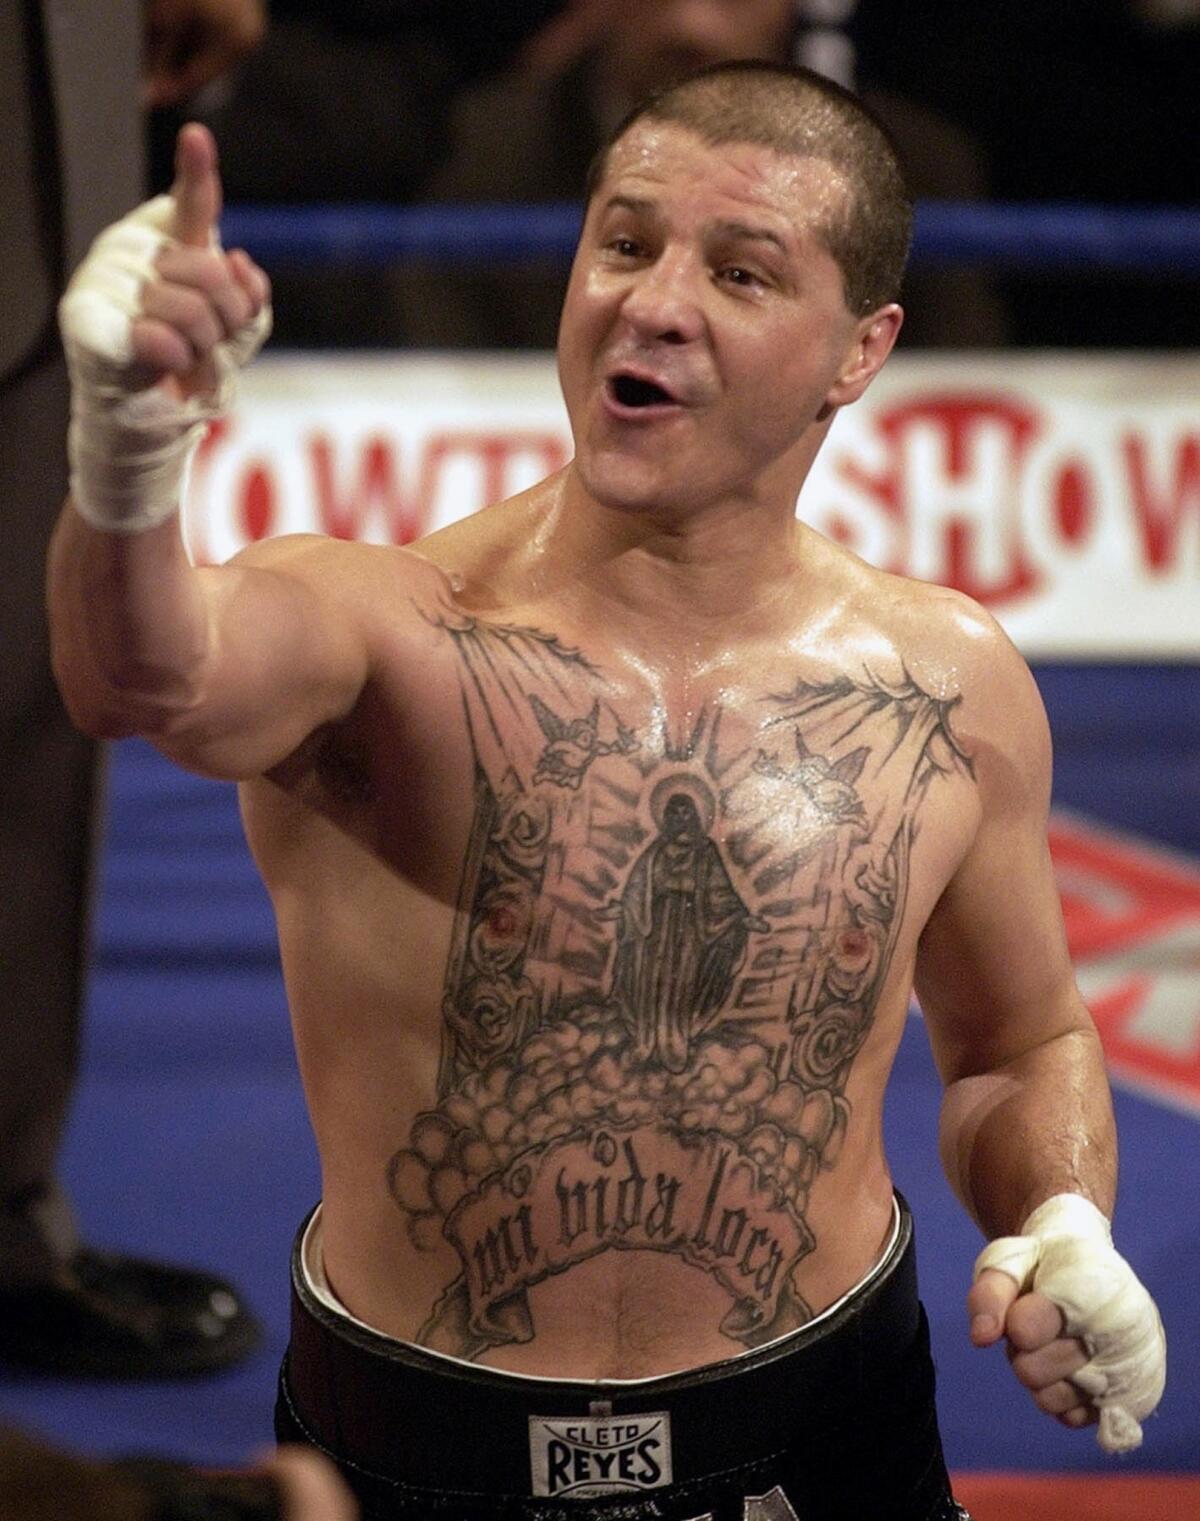 Longtime promoter Roy Englebrecht says the late Johnny Tapia was one of the greatest boxers to appear in one of his bouts.